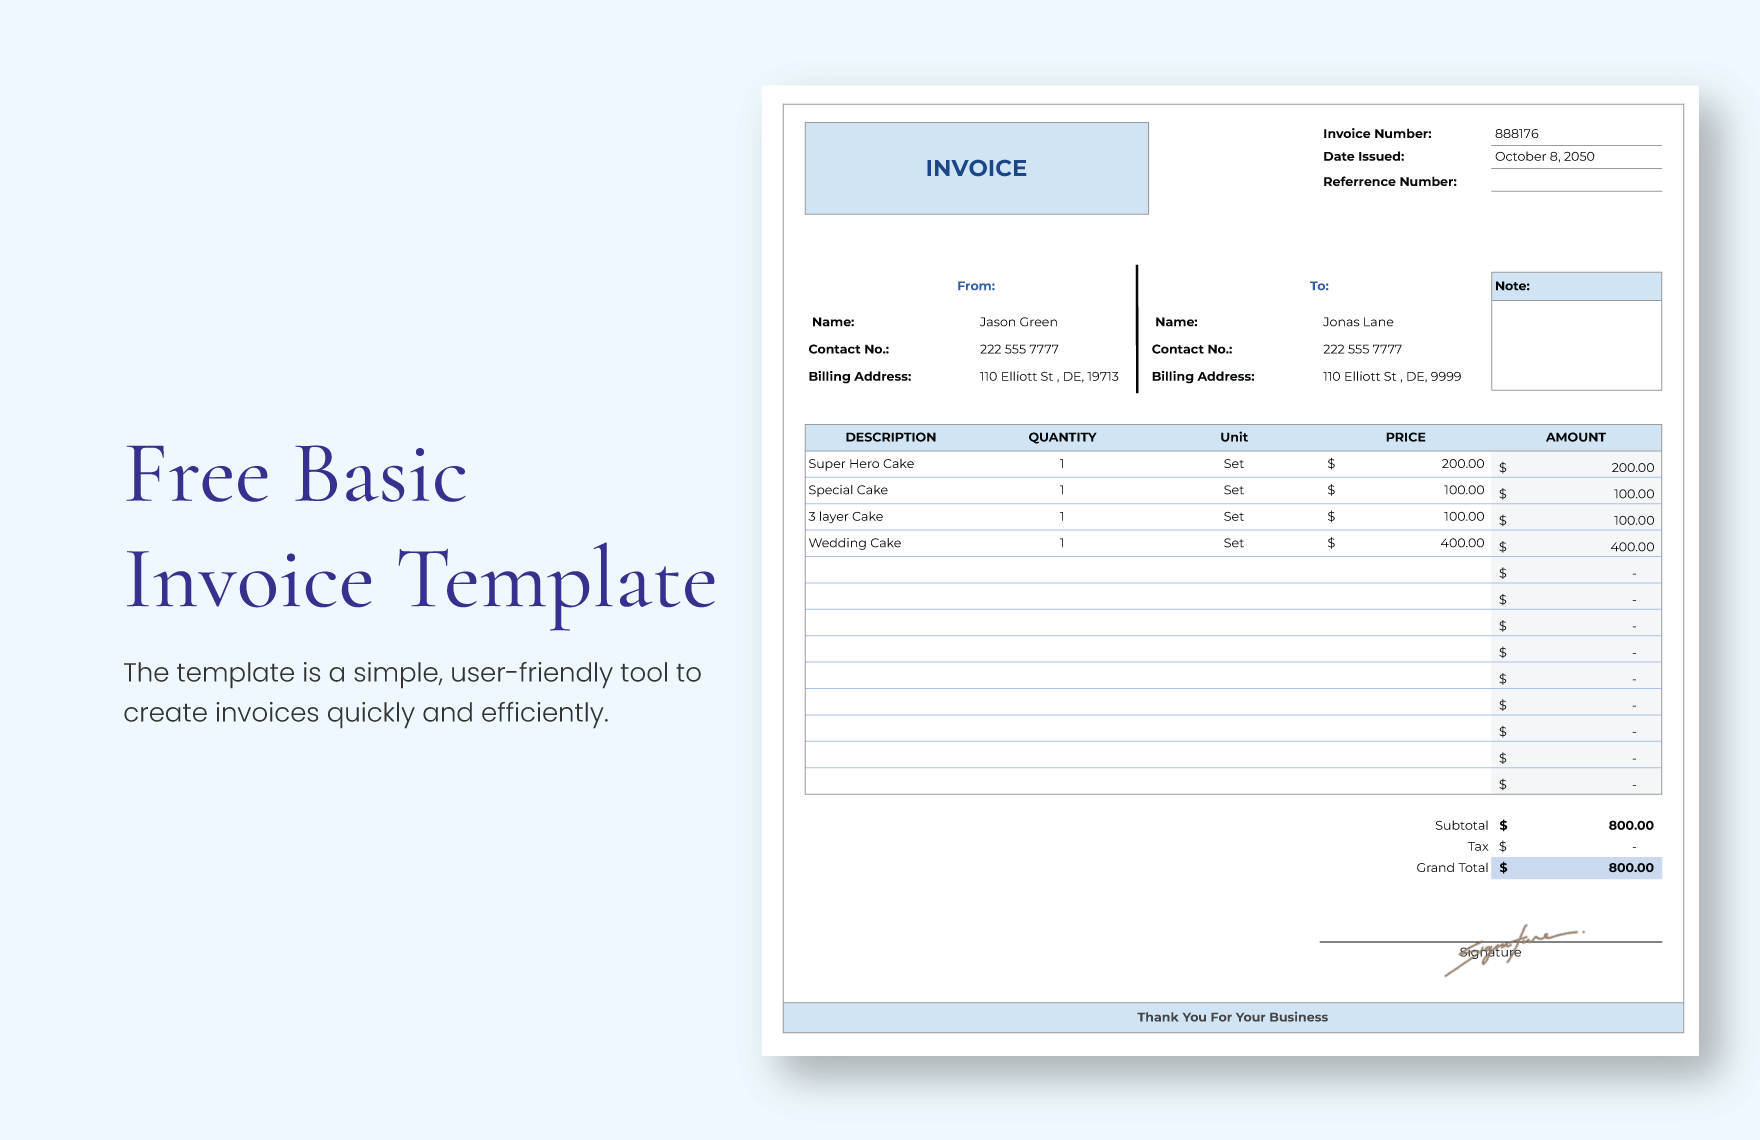 sample invoice excel template